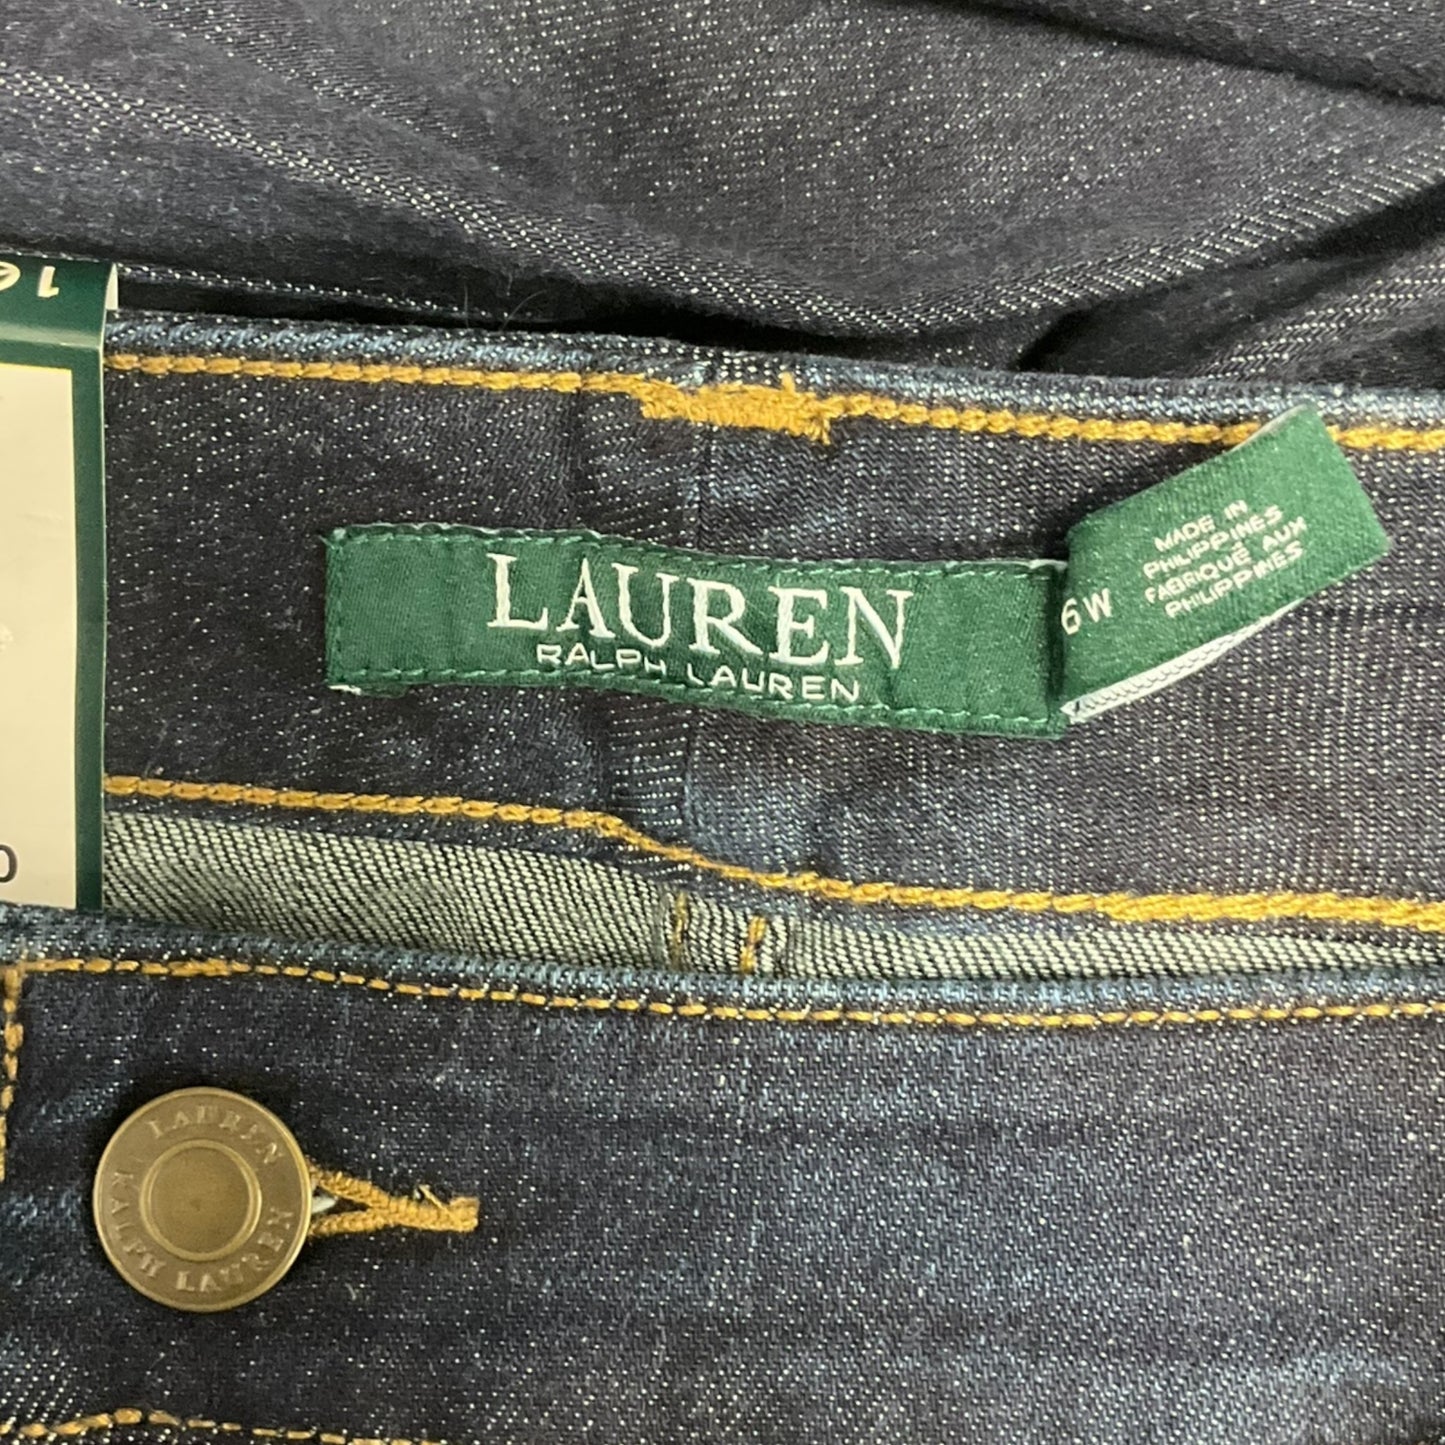 Jeans Straight By Ralph Lauren  Size: 16